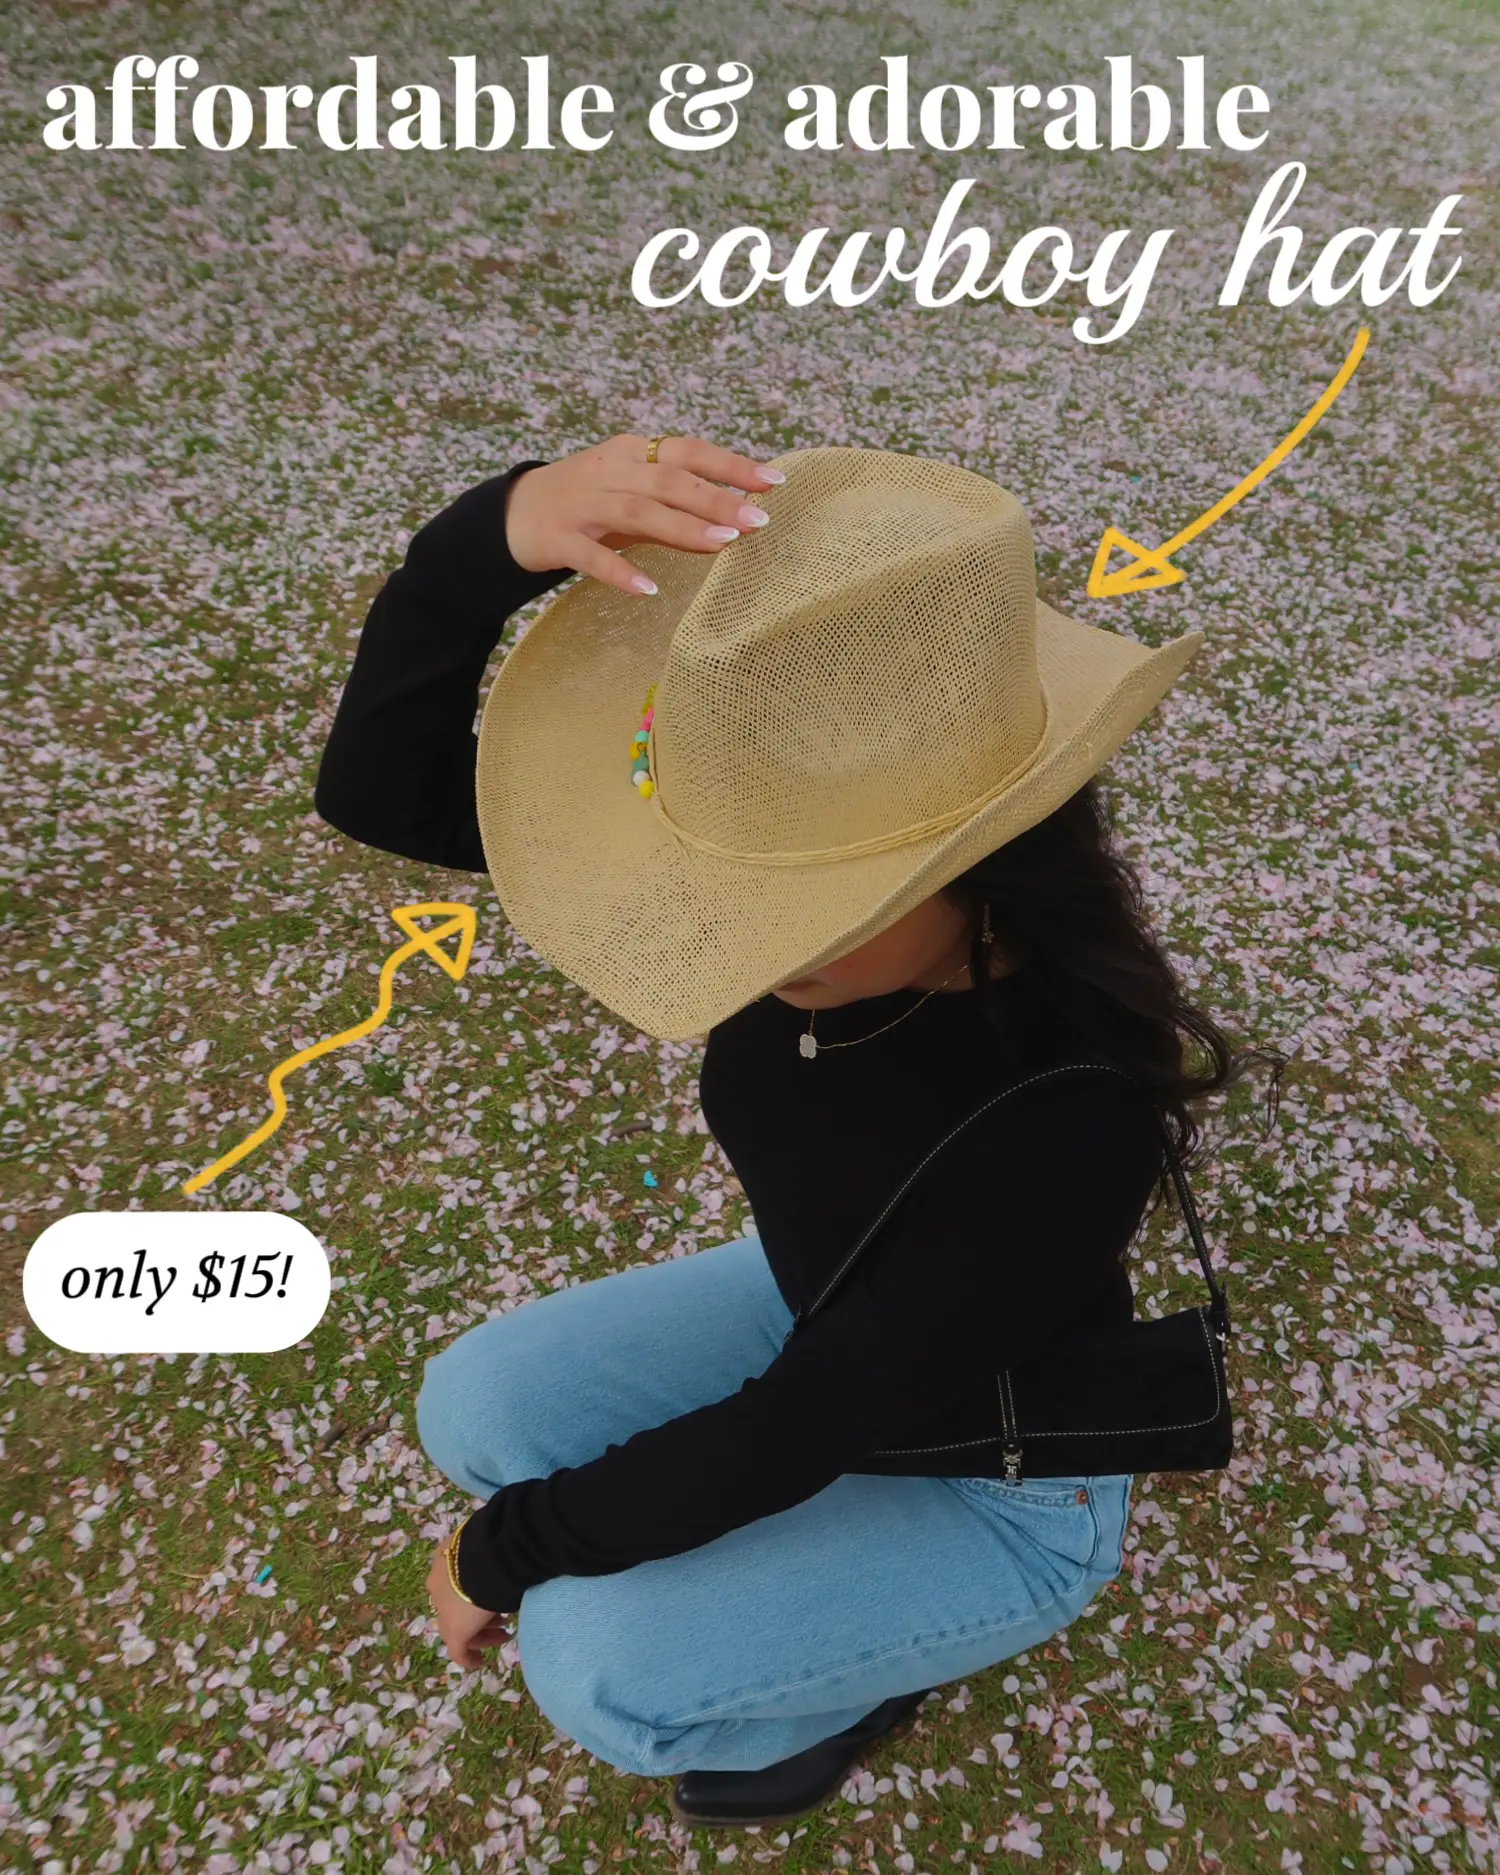 fvwitlyh Big Brimmed Hats for Men Women Cowboy Star Printing Sun All  Baseball Hat Hat with Neck Cover